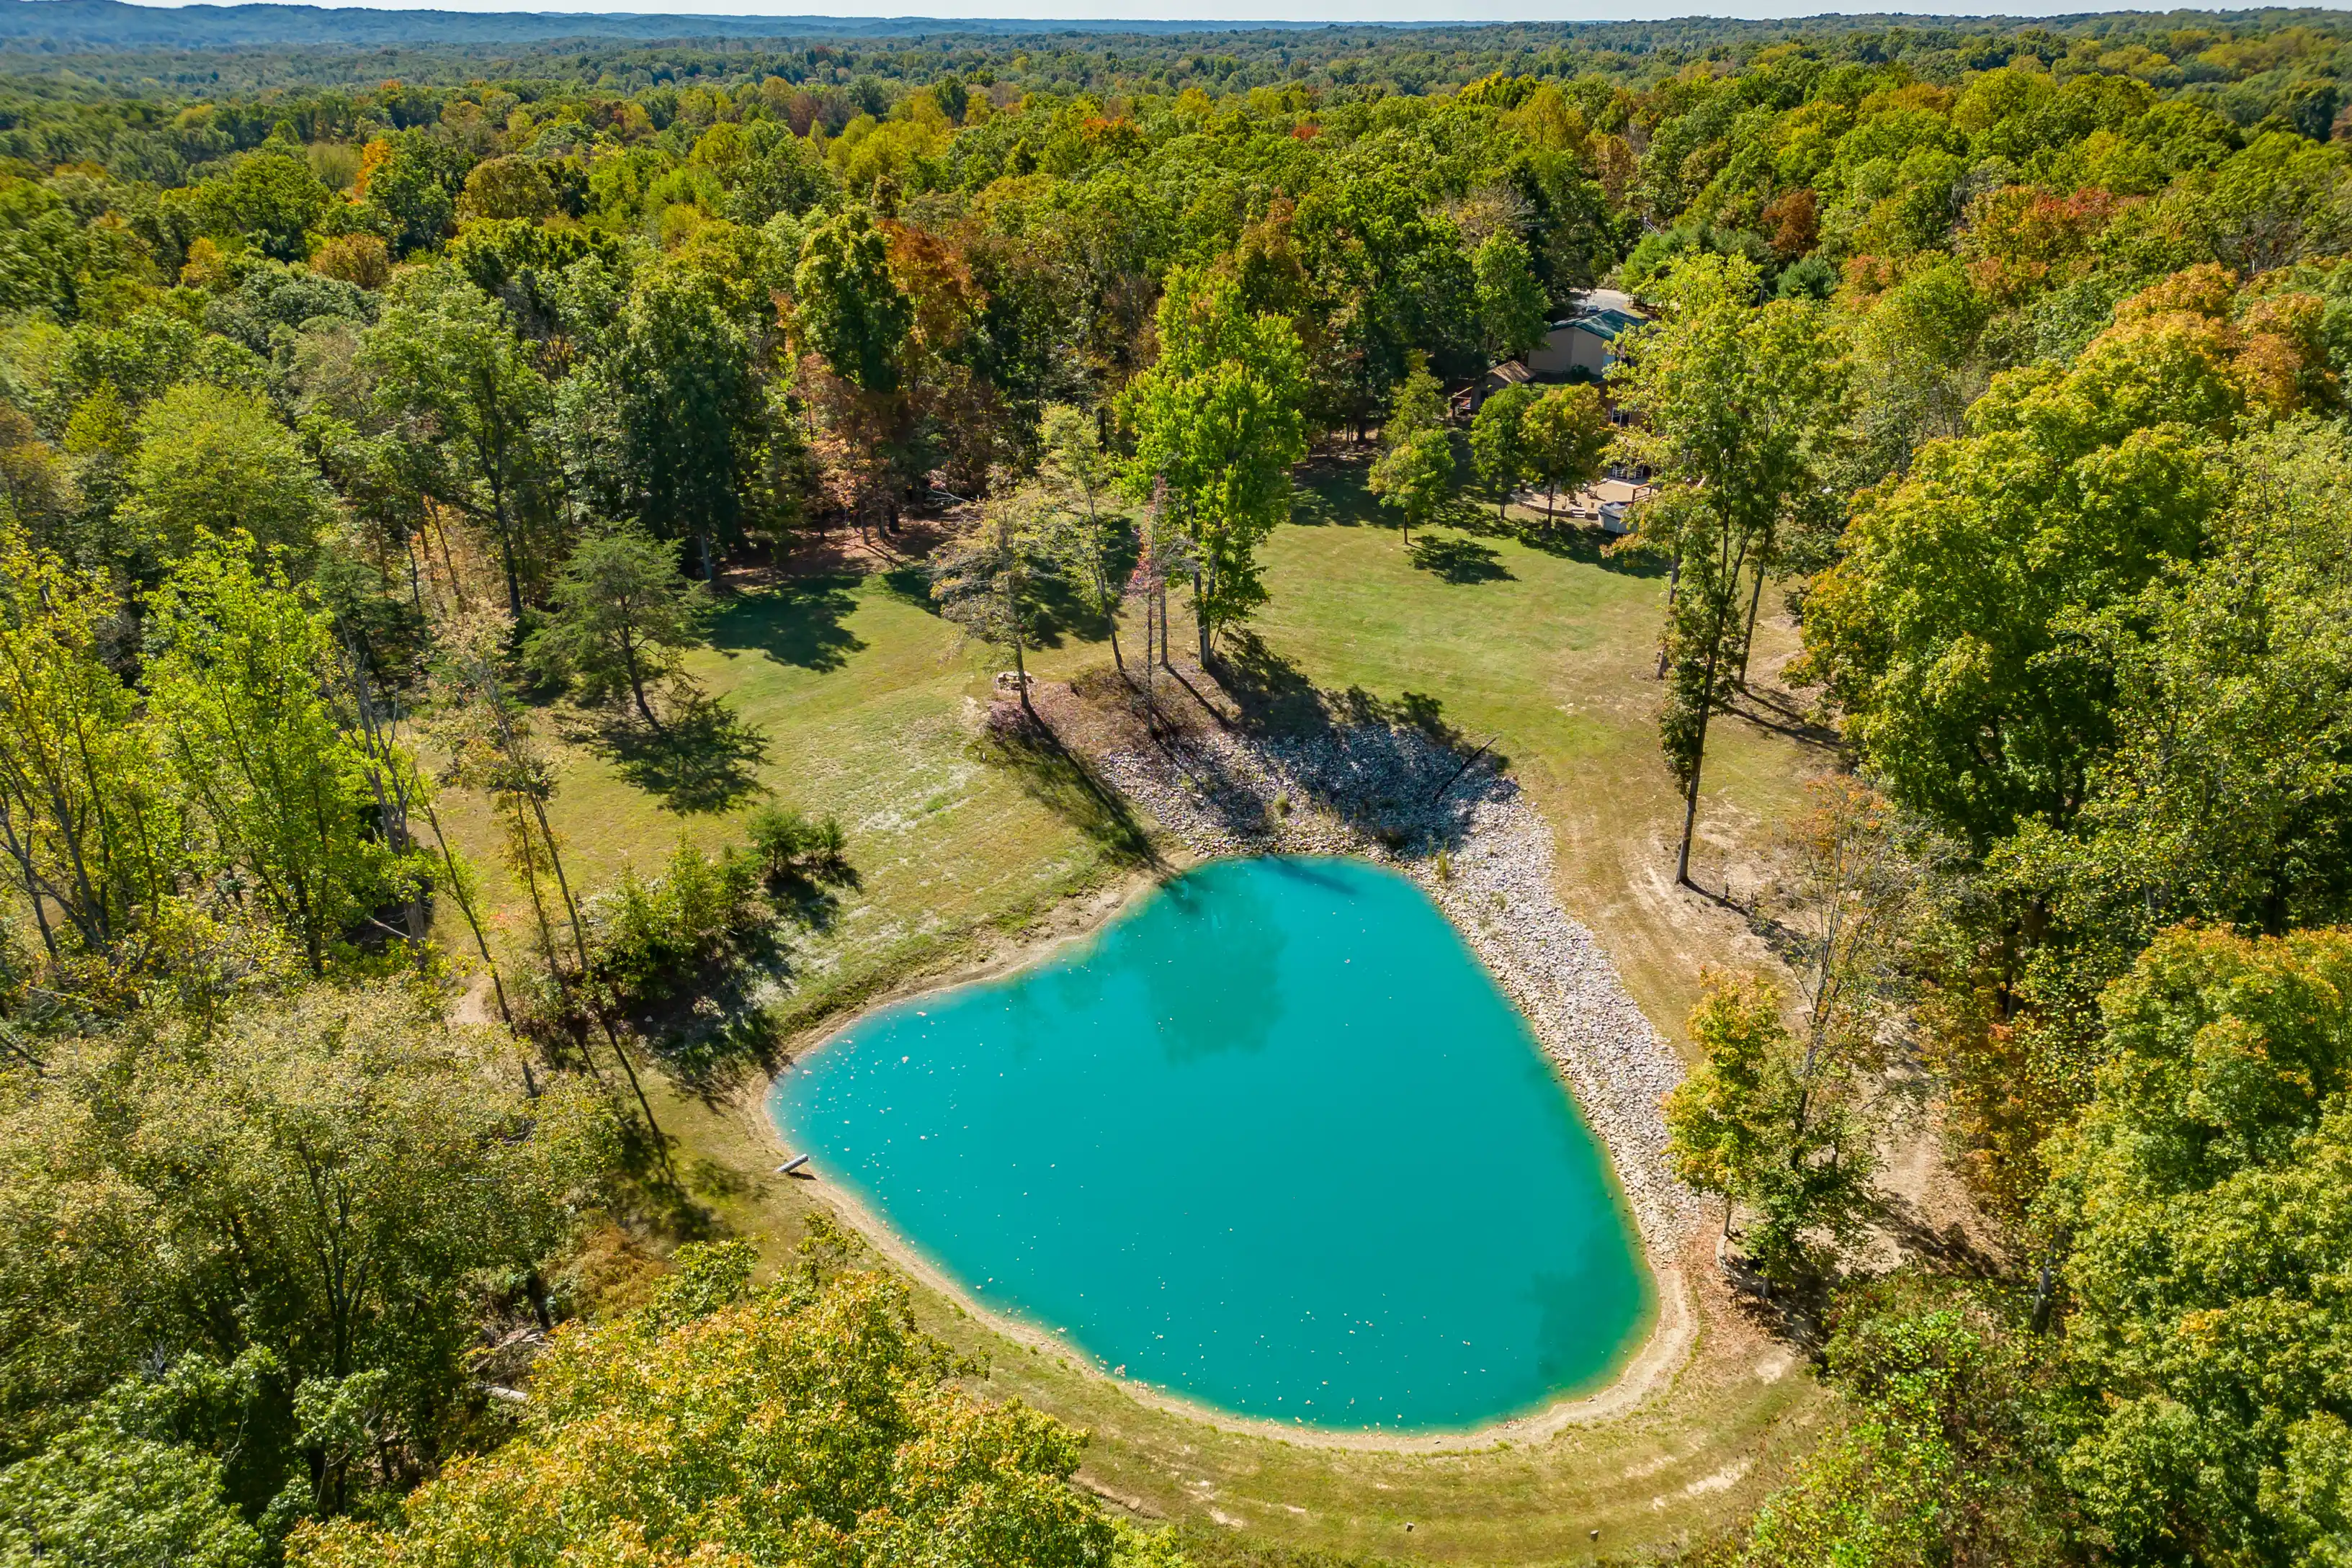 Aerial view of a small heart-shaped pond surrounded by trees with fall foliage and a house partially visible in the background.